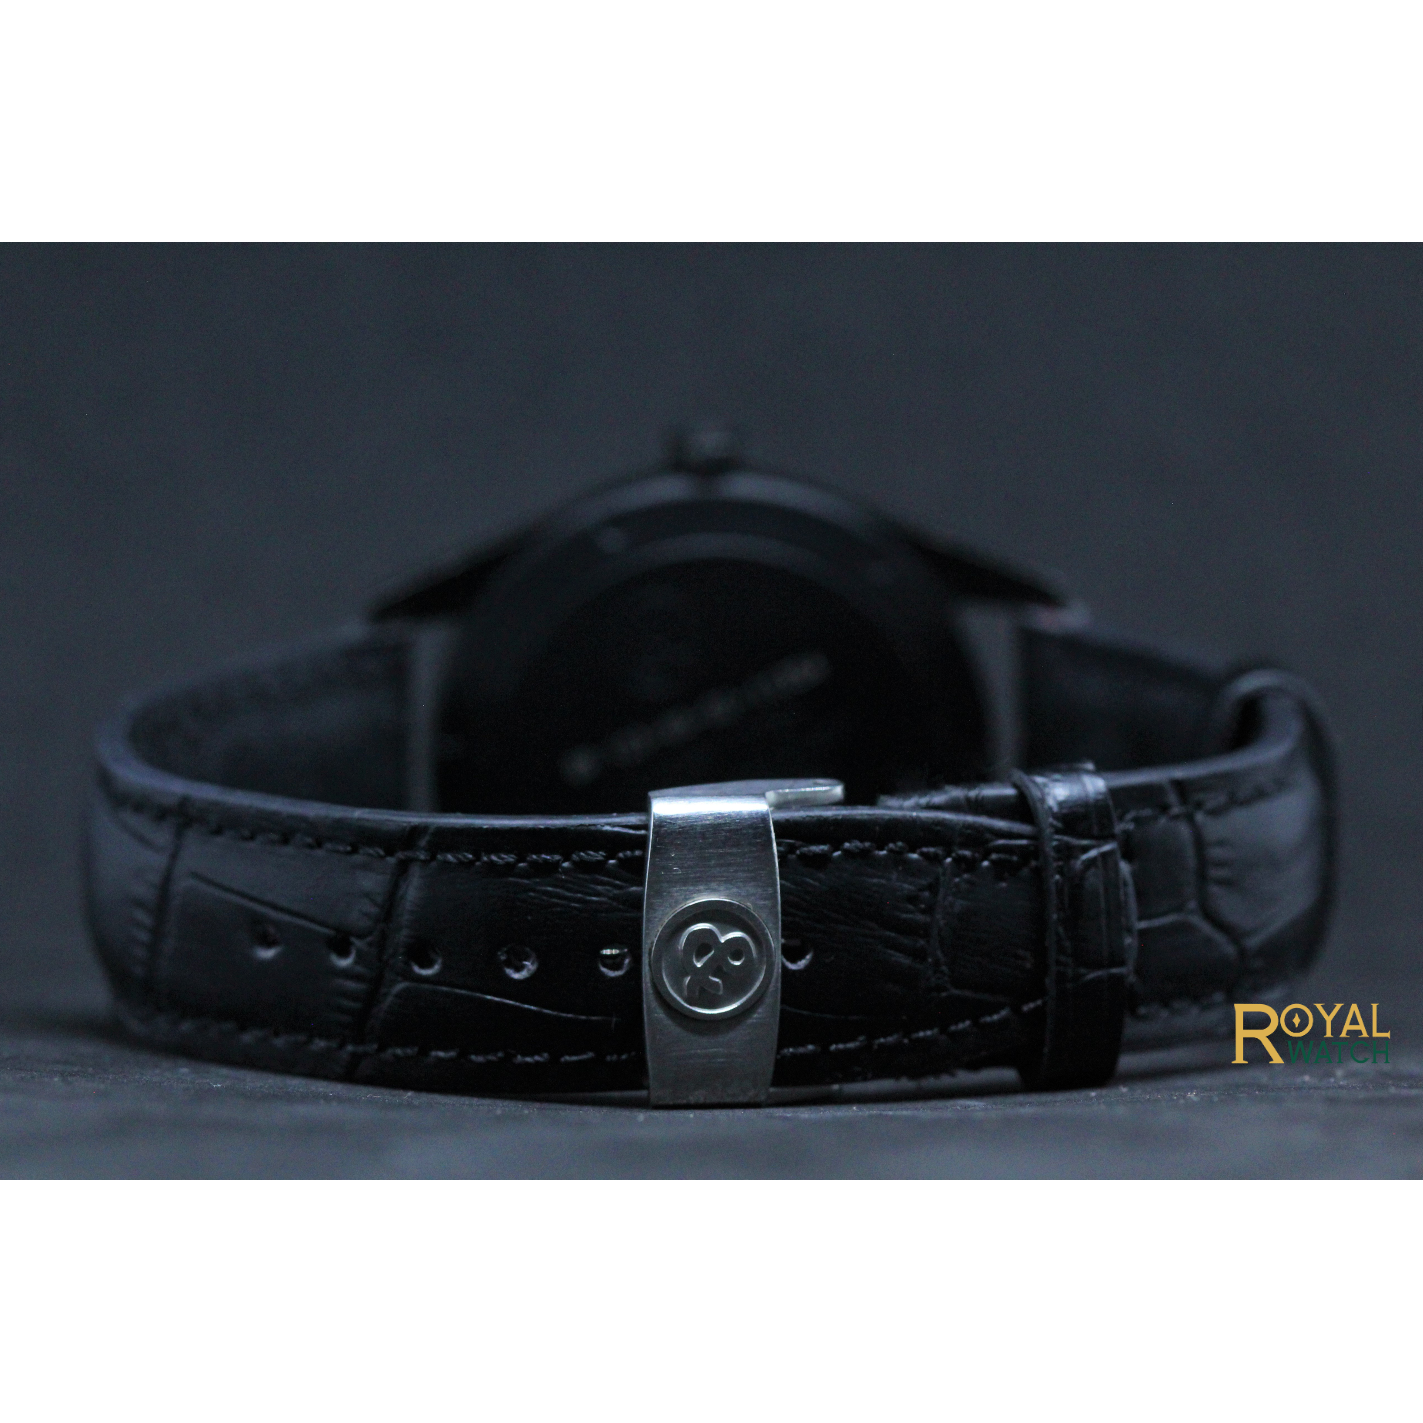 Bell & Ross Automatic (Pre-Owned)